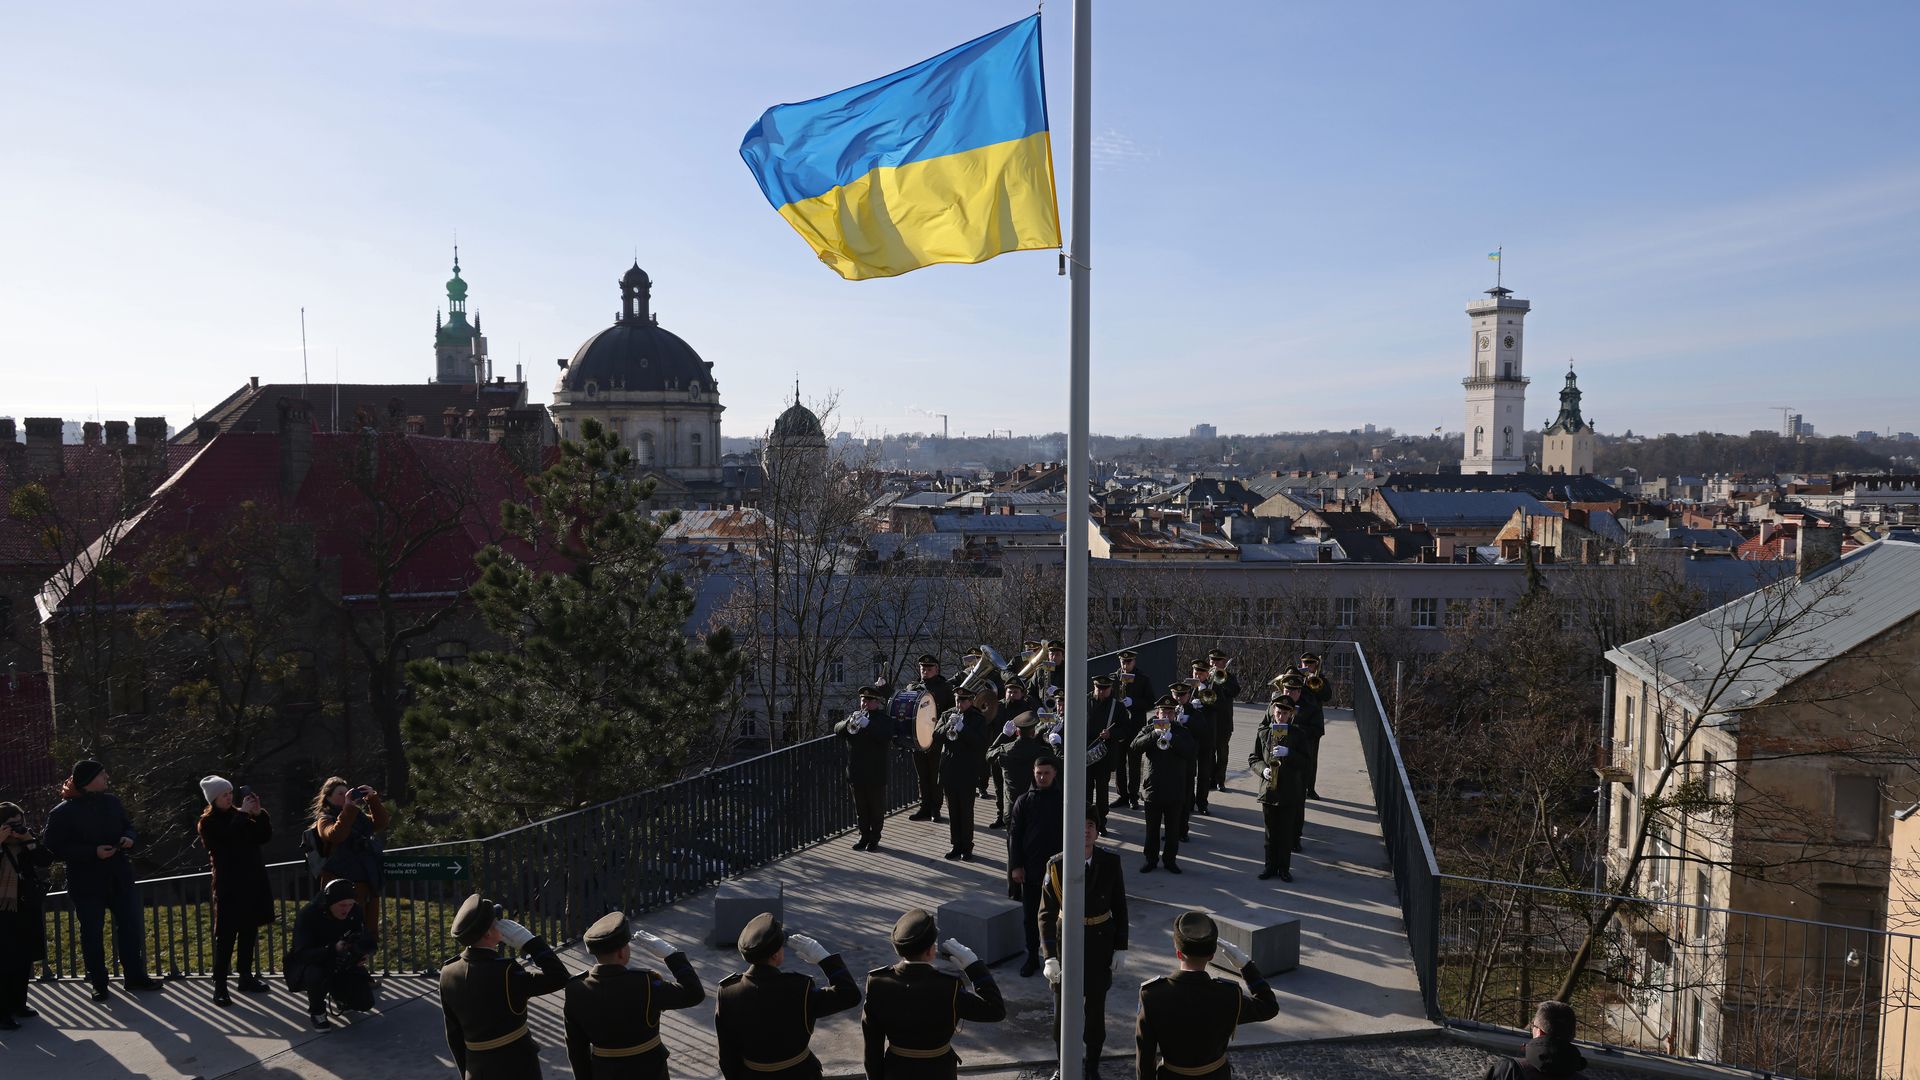  An honor guard raising the Ukrainian flag during a ceremony in Lviv, Ukraine, in February 2023.